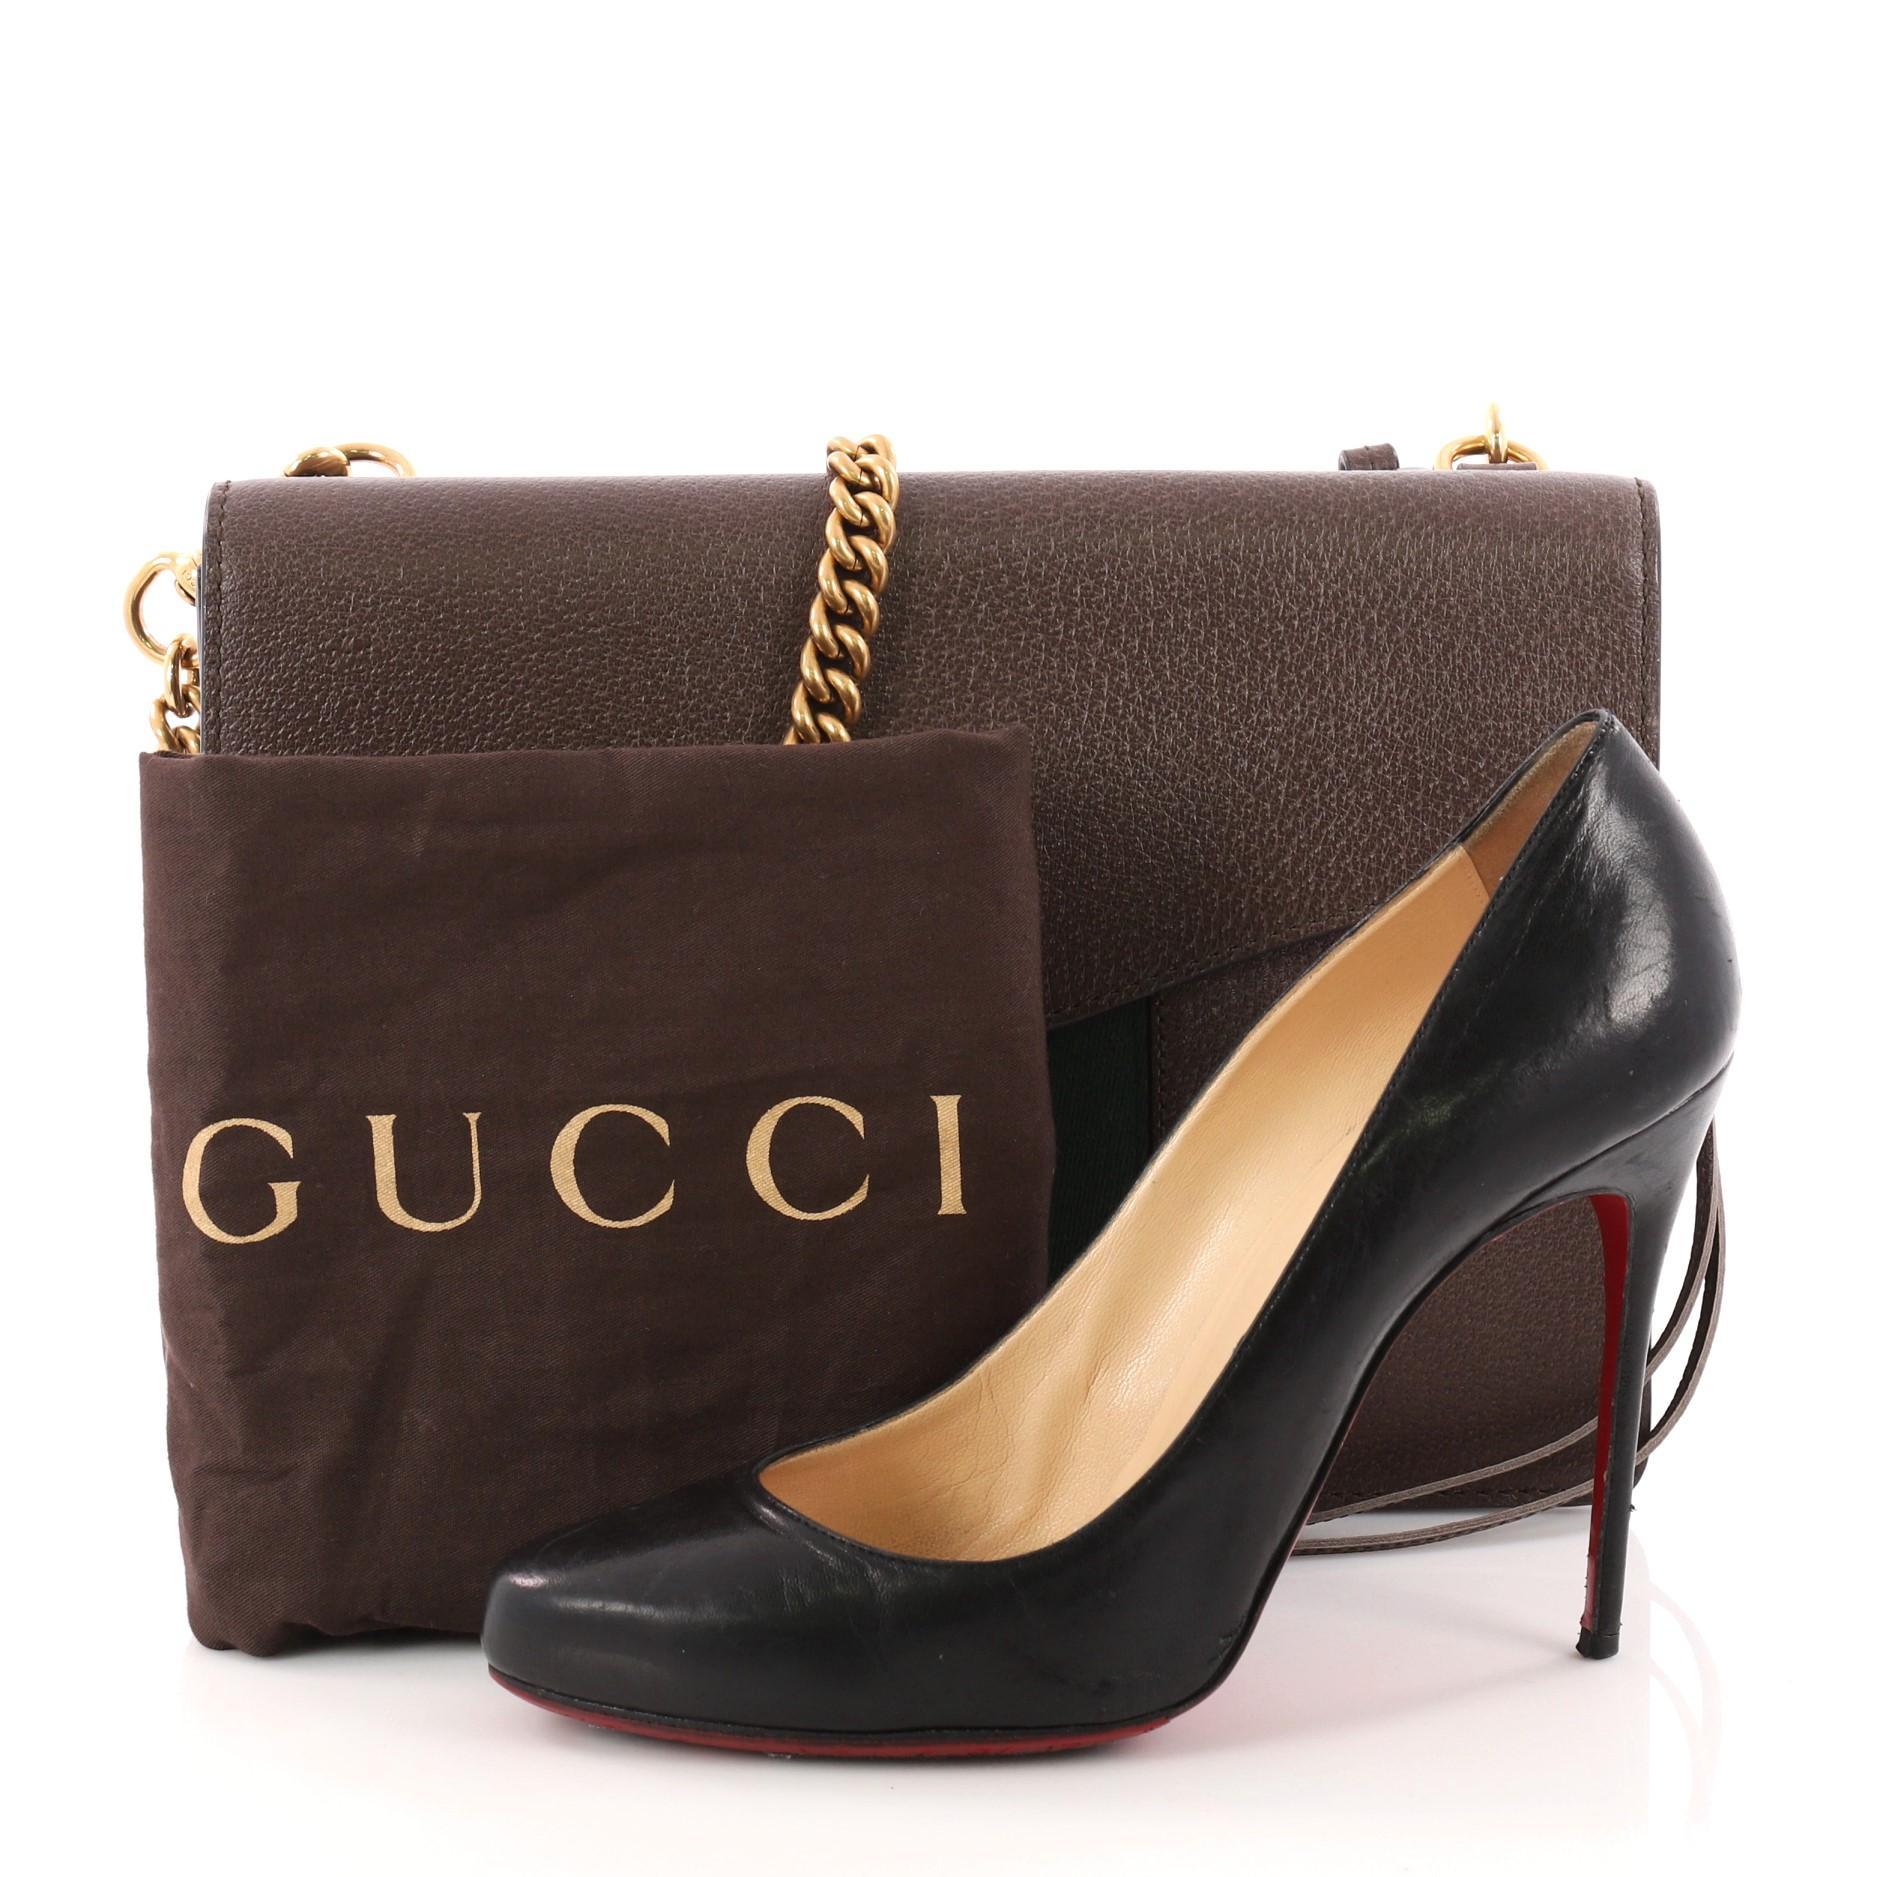 This authentic Gucci Animalier Web Chain Shoulder Bag Leather Small is a chic bag perfect for on-the-go fashionistas. Crafted in brown leather, this shoulder bag features chain-link shoulder strap, red and green wed detailing, gold-tone feline head